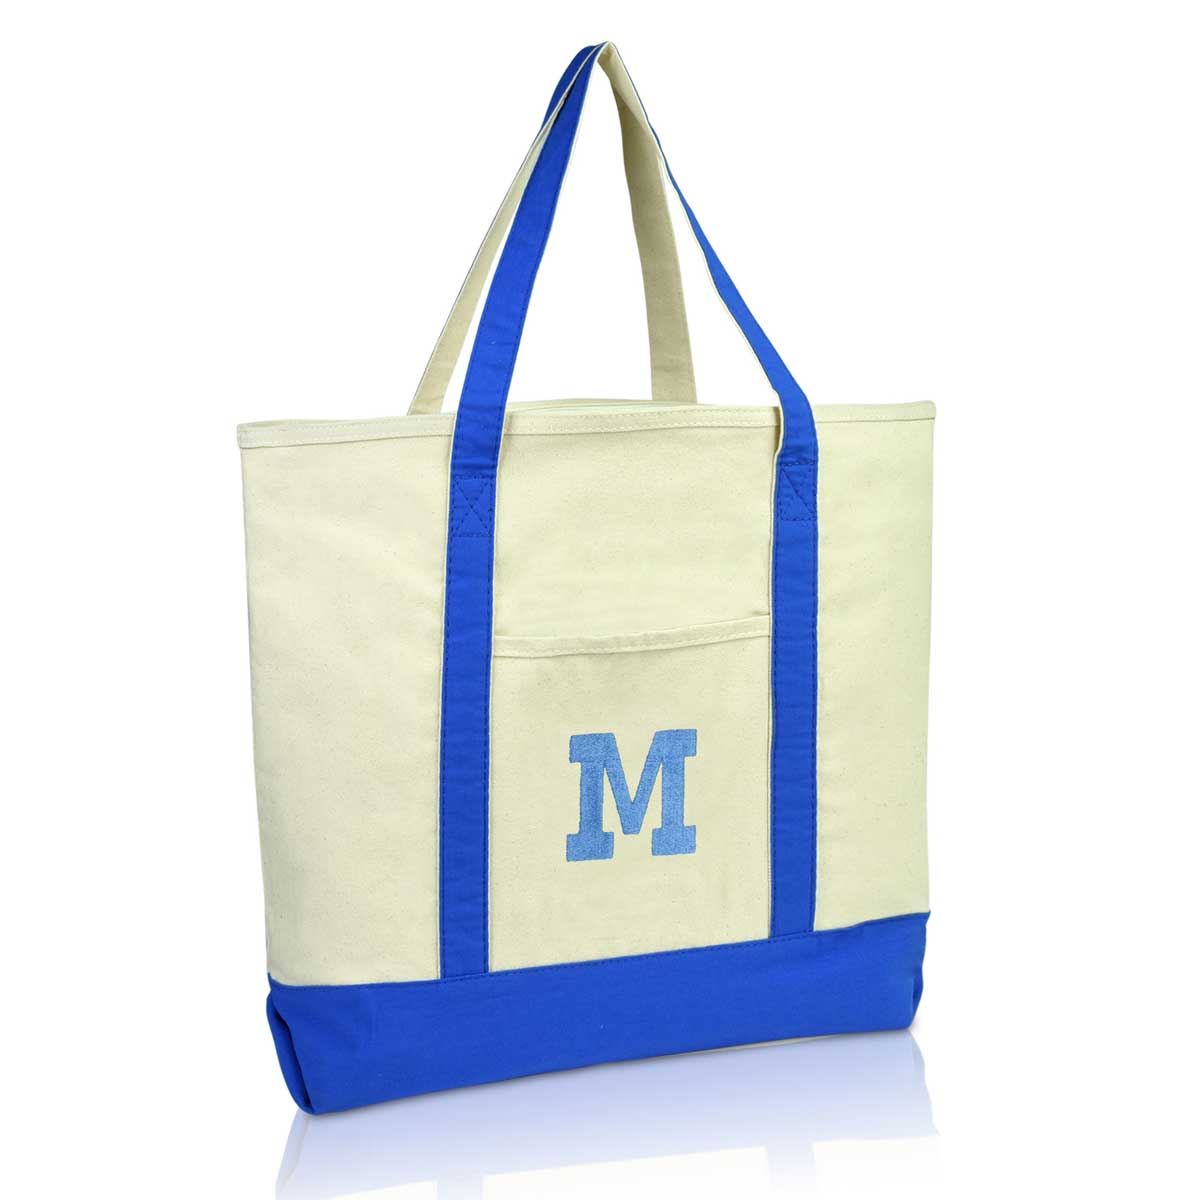 Dalix Initial Tote Bag Personalized Monogram Zippered Top Letter - M Royal Blue